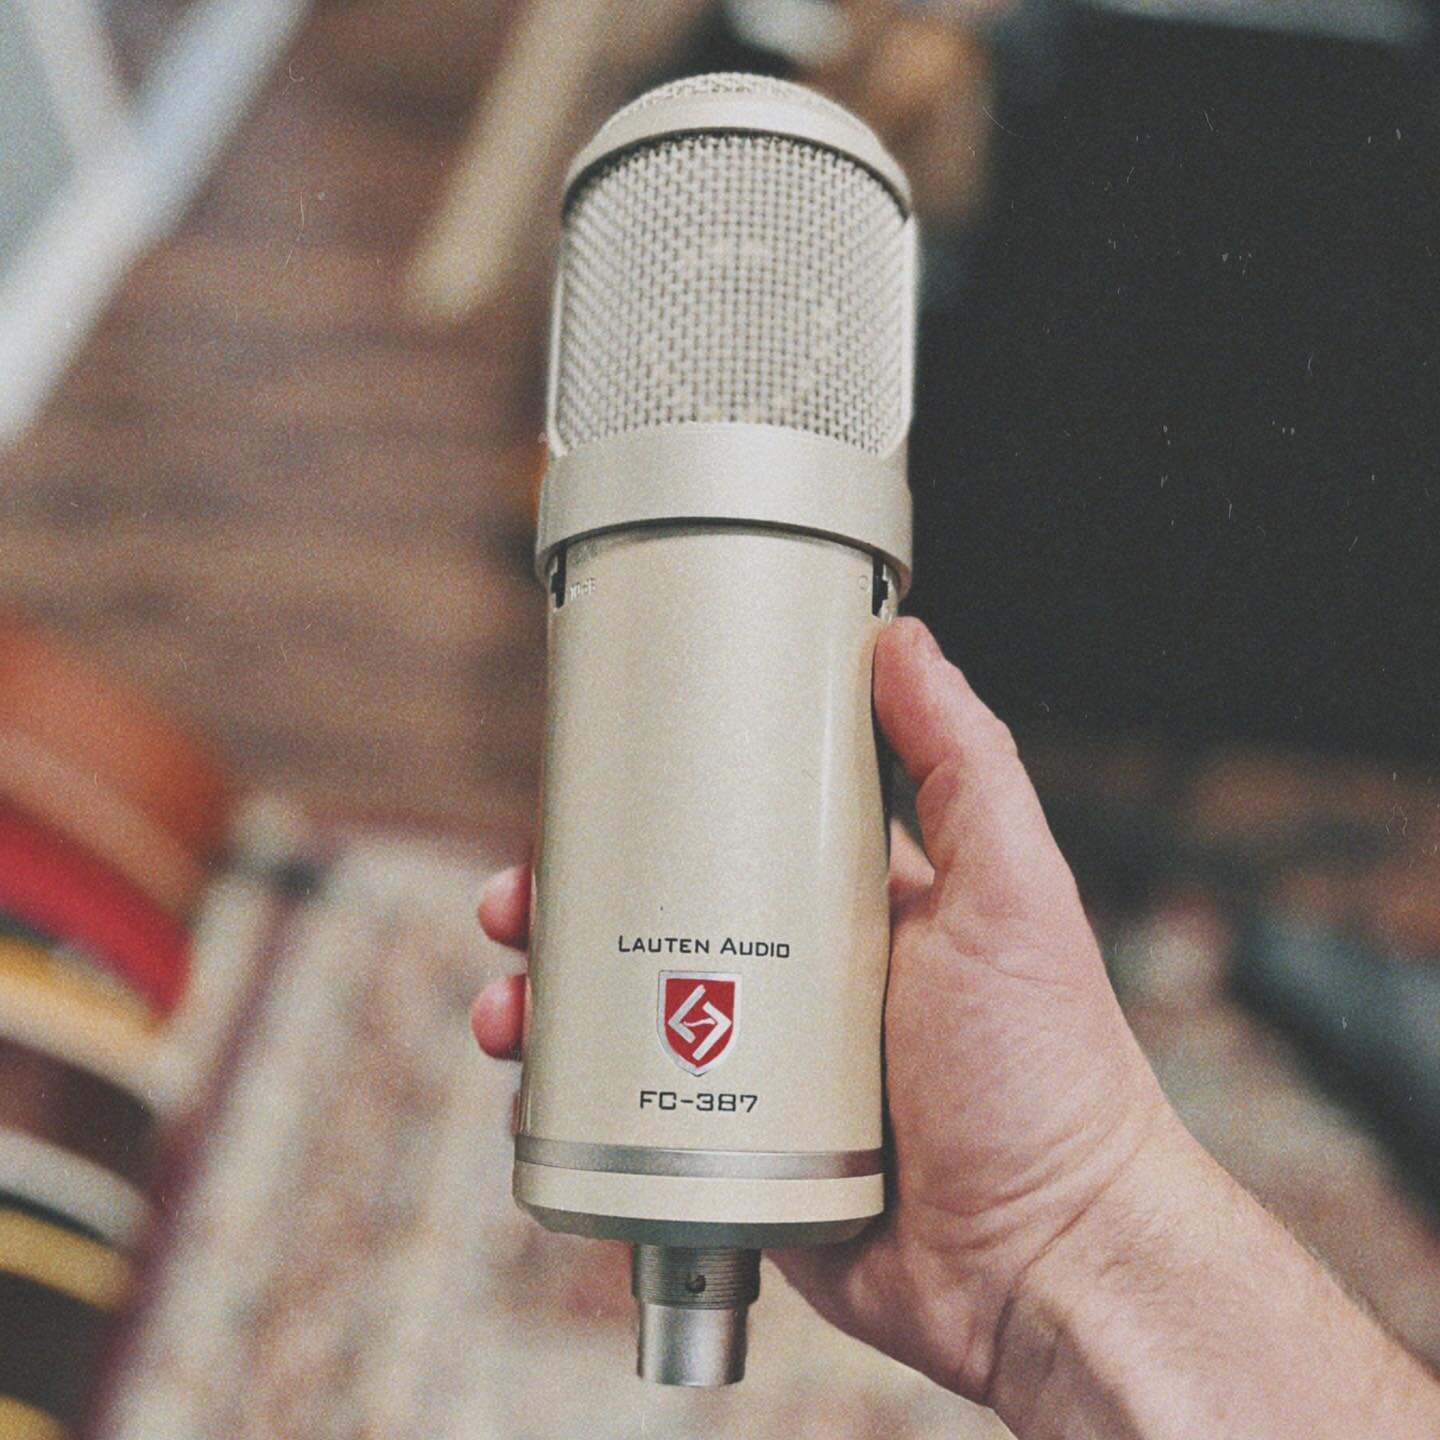 Super pumped to add this to the collection. Been enjoying the LA 120&rsquo;s on piano and acoustic. This thing though is built like a tank. Thanks @lautenaudio for making great microphones over and over again.